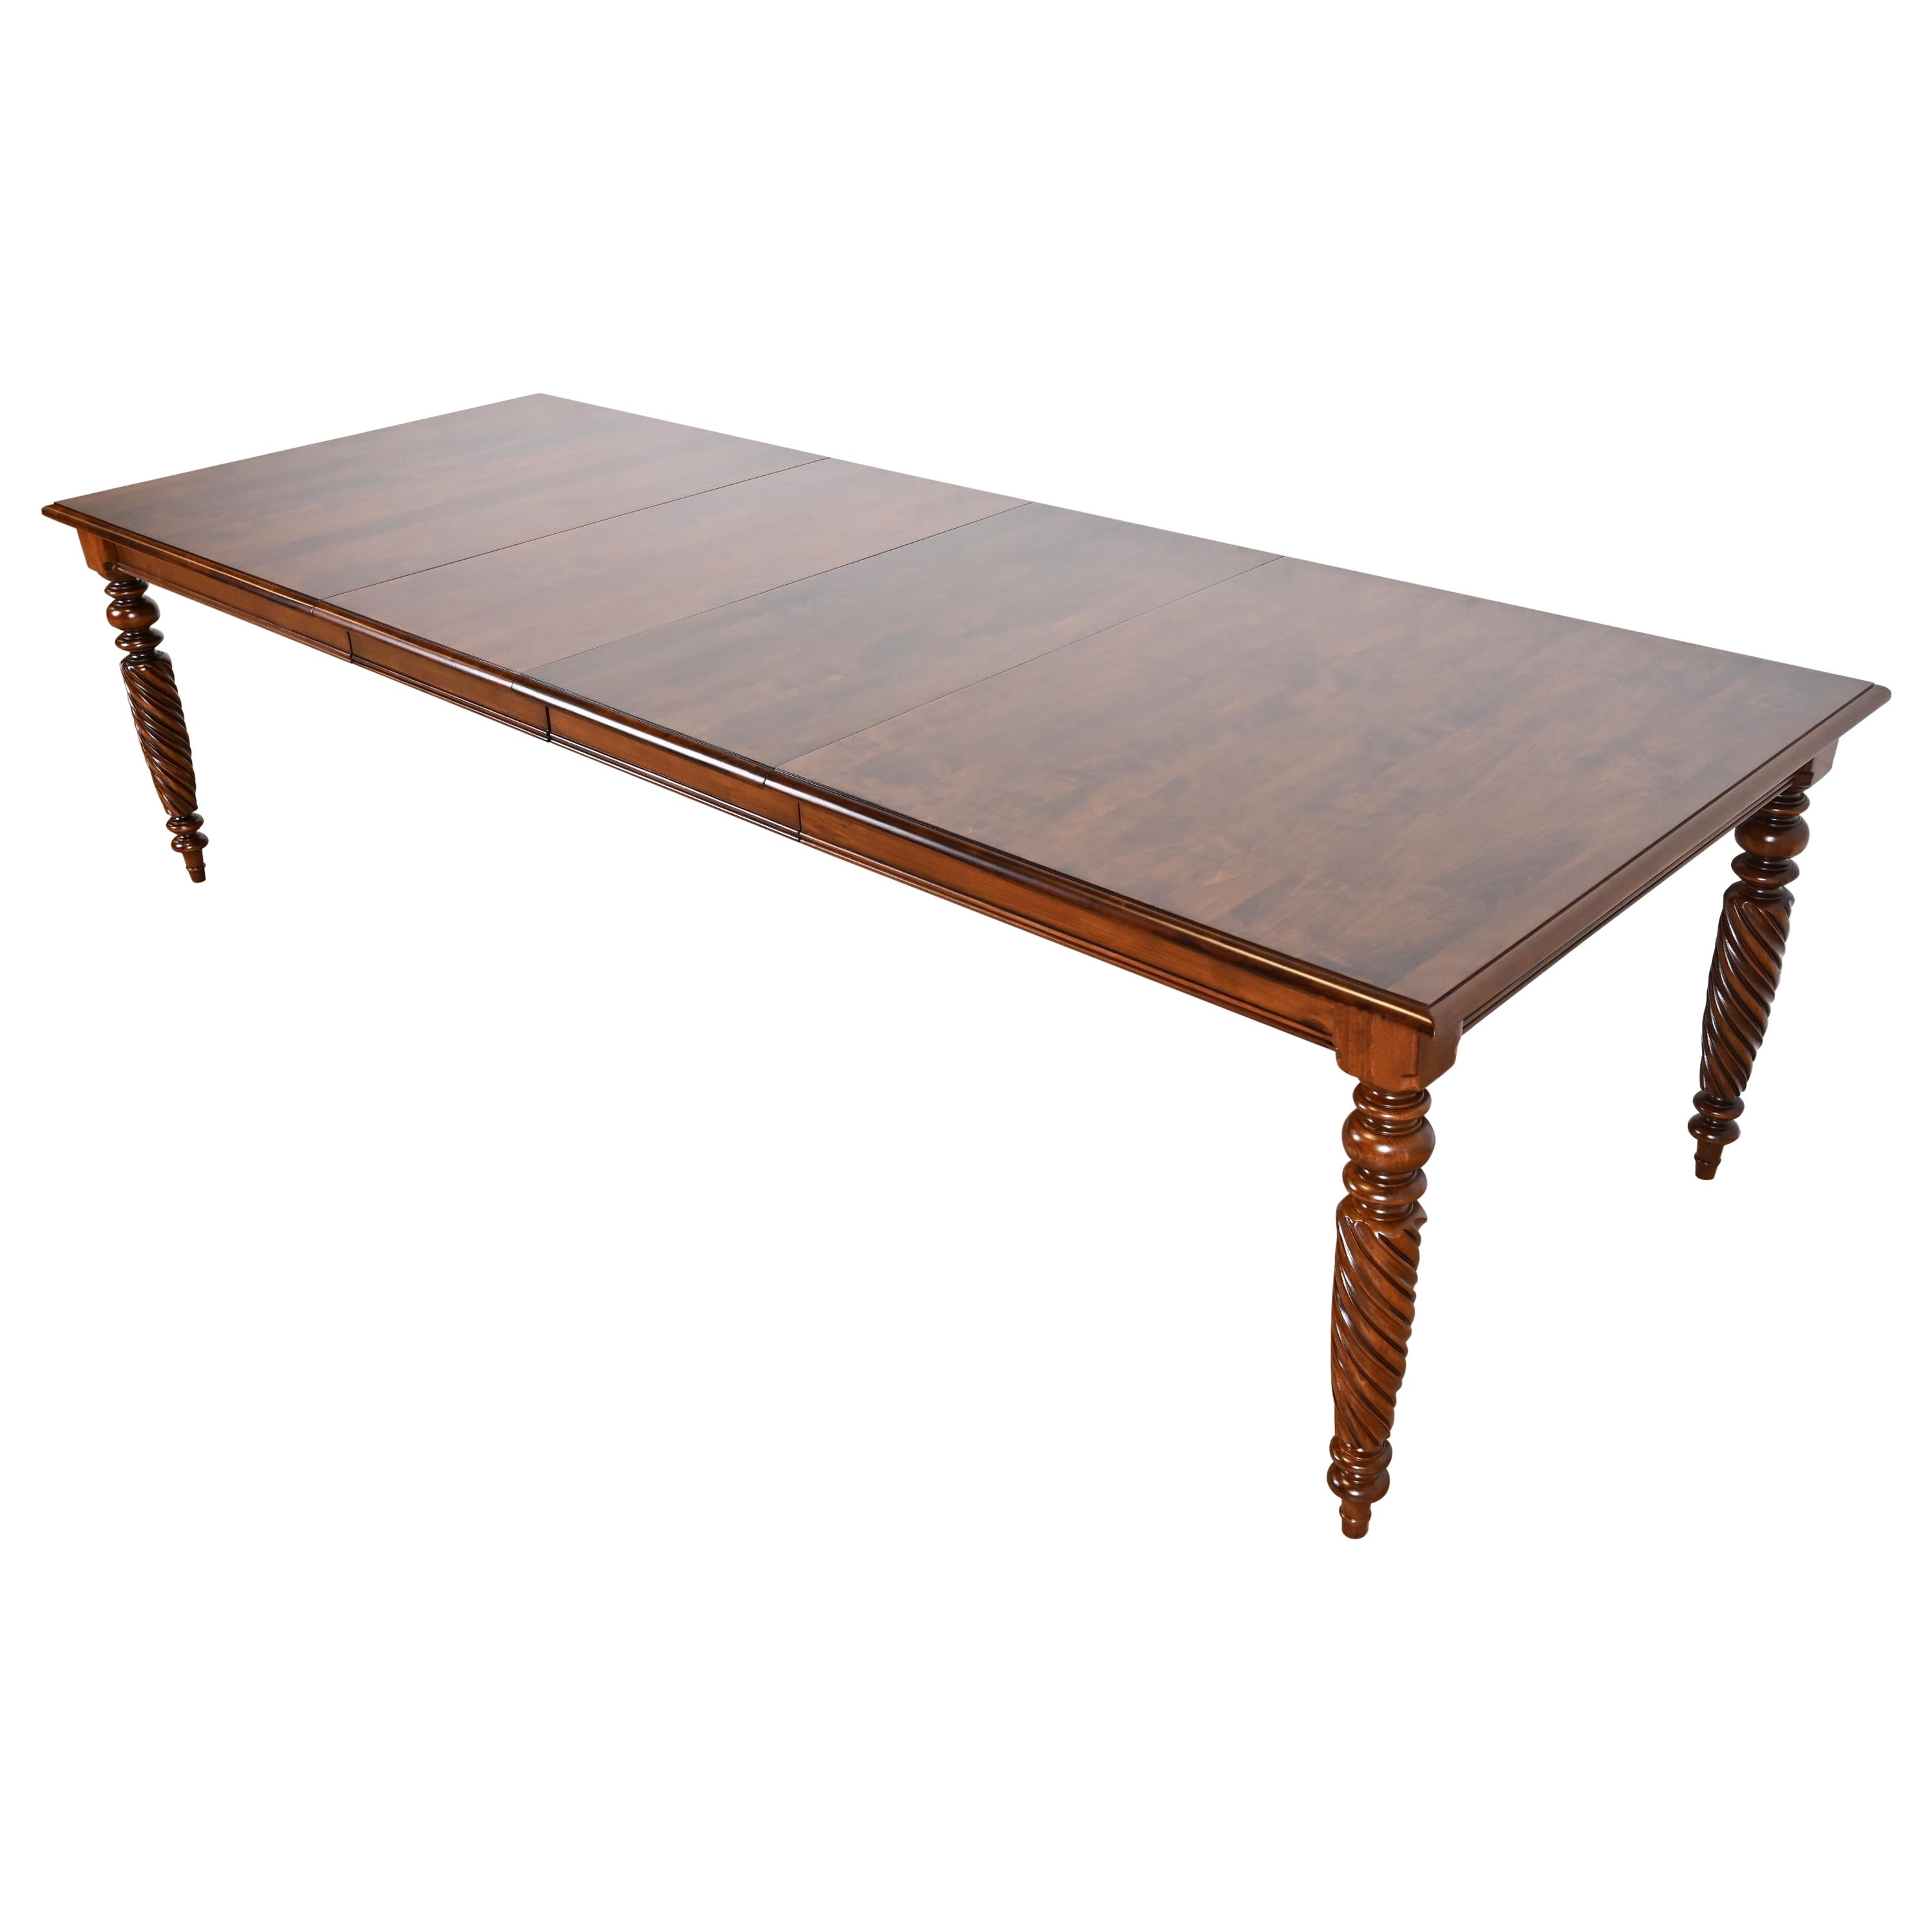 British Colonial Solid Maple Extension Dining Table, Newly Refinished For Sale